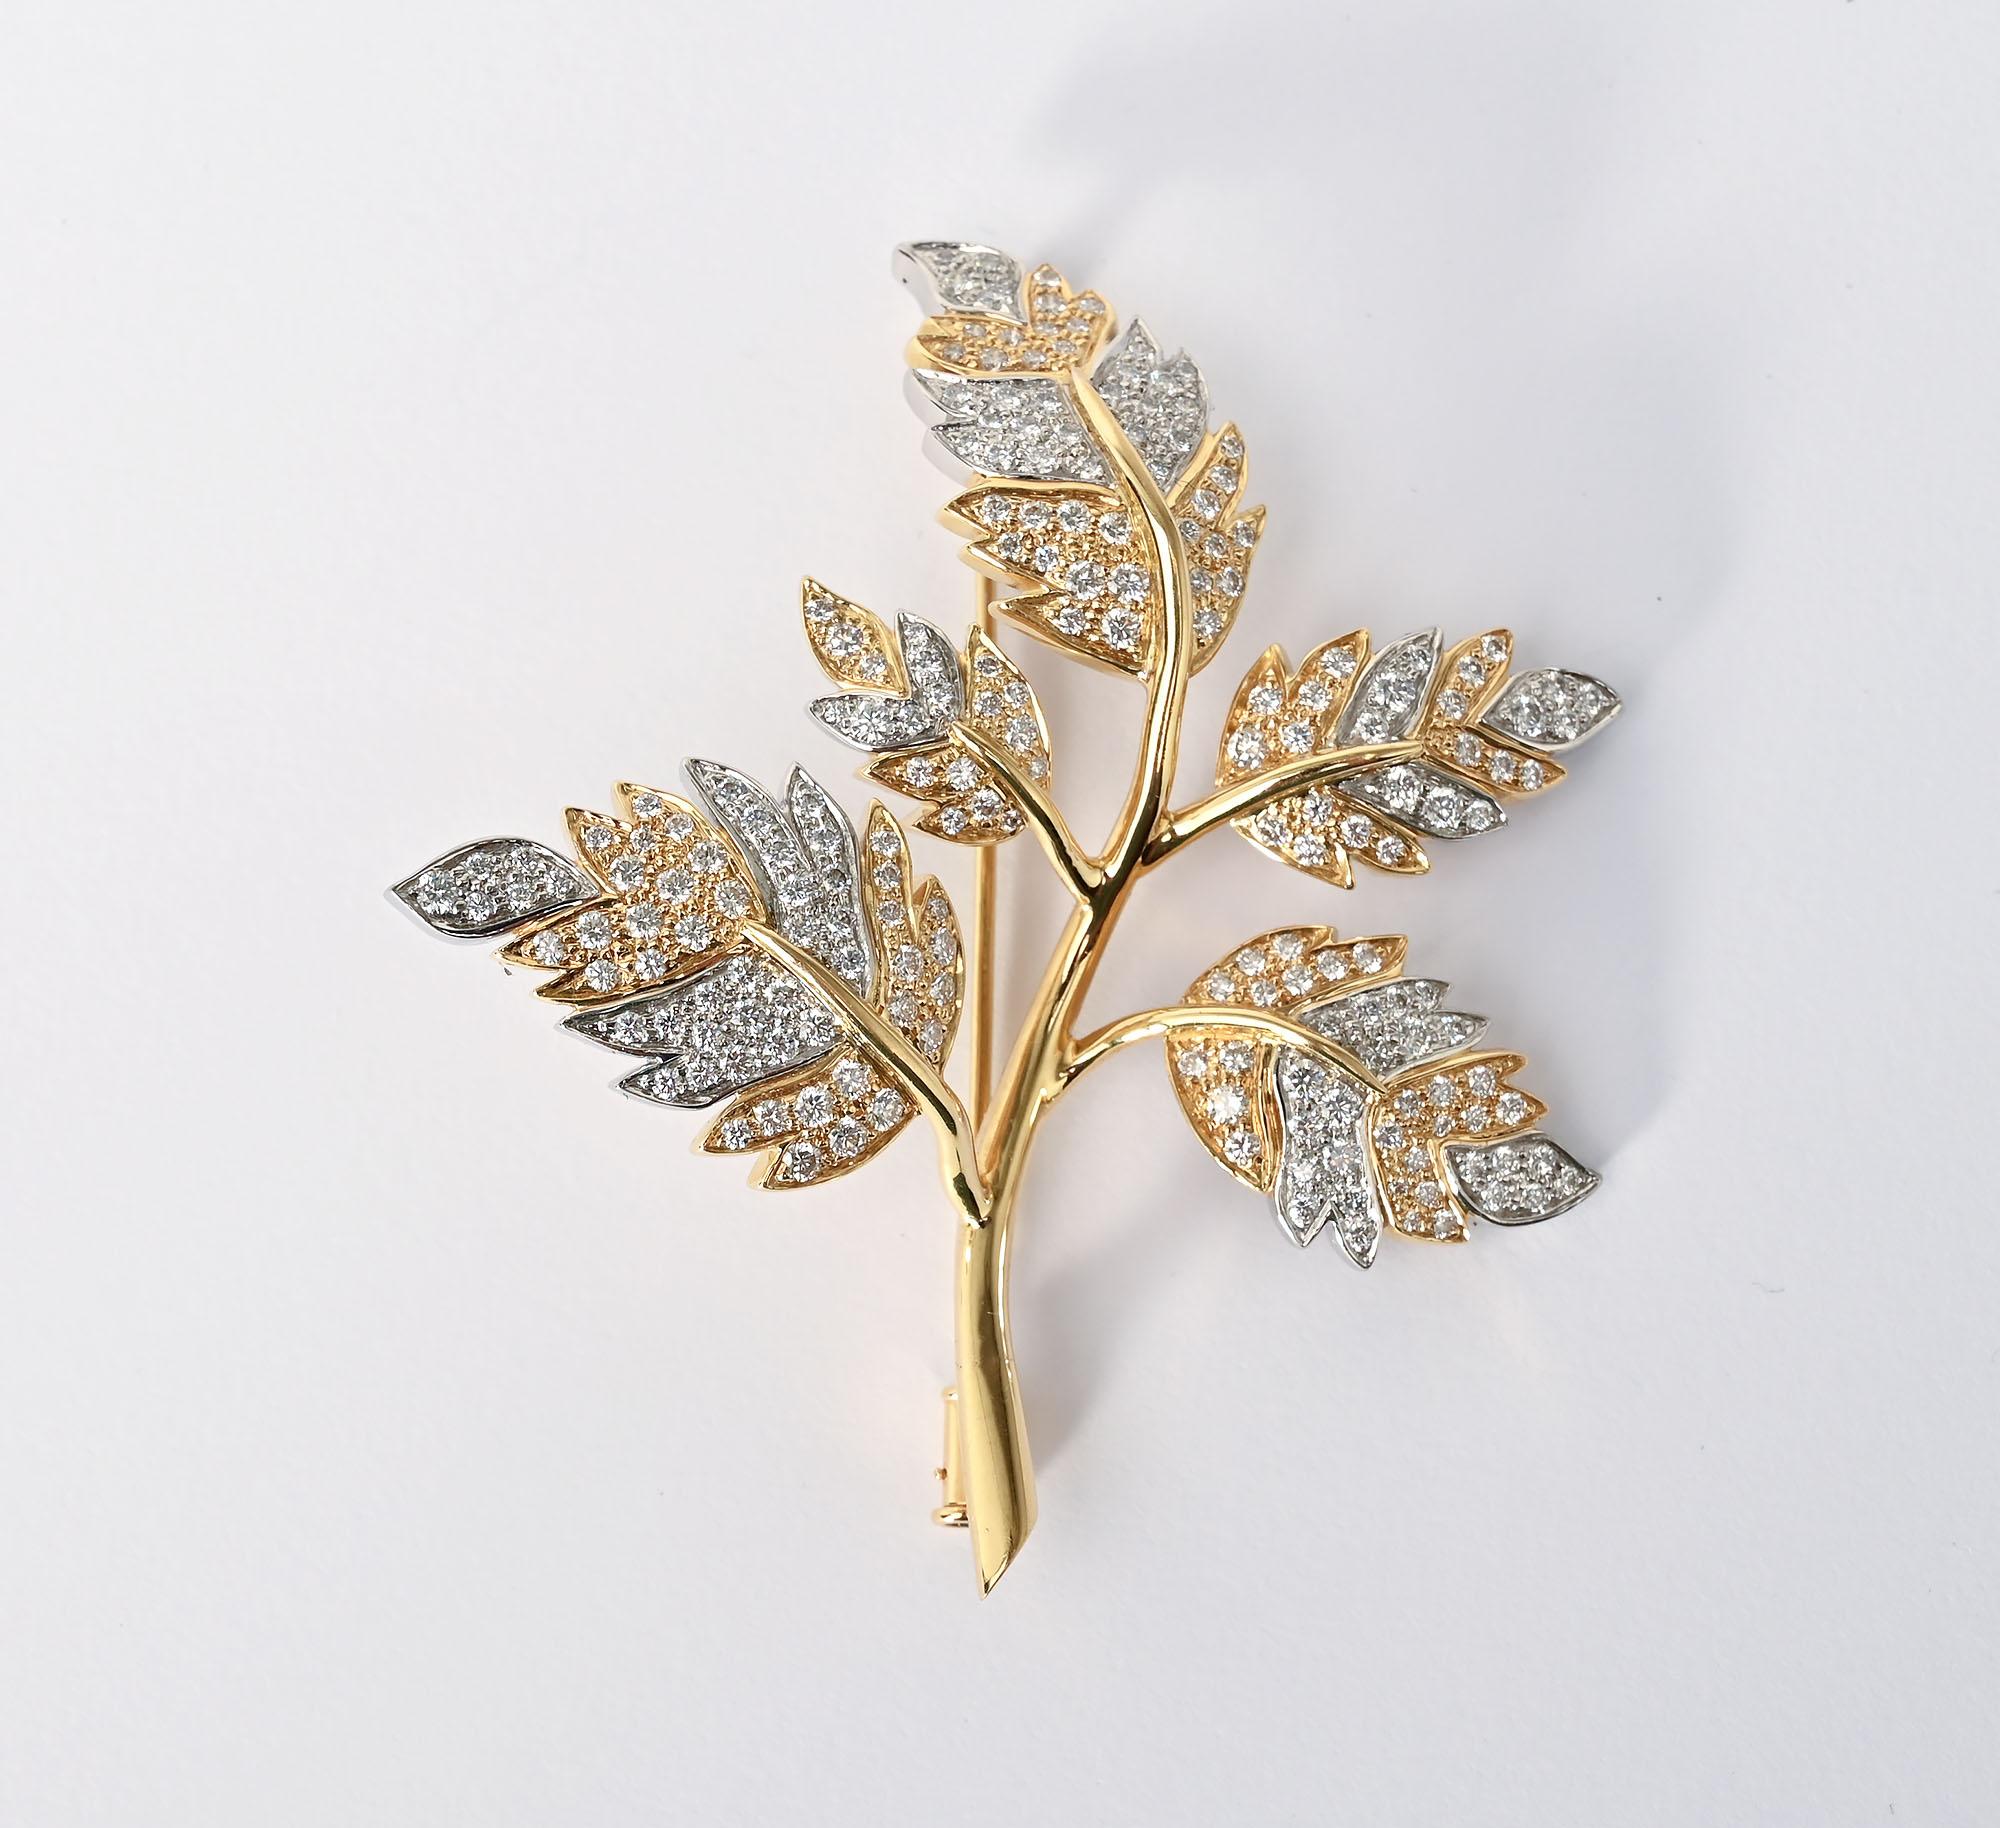 Jean Schlumberger was vice president of Tiffany and one of their premier designers. Among those who collected his work were Bunny Mellon; Babe Paley and Diana Vreeland. His pieces continue to be sought  by many.
This floral brooch has 2.5 carats of